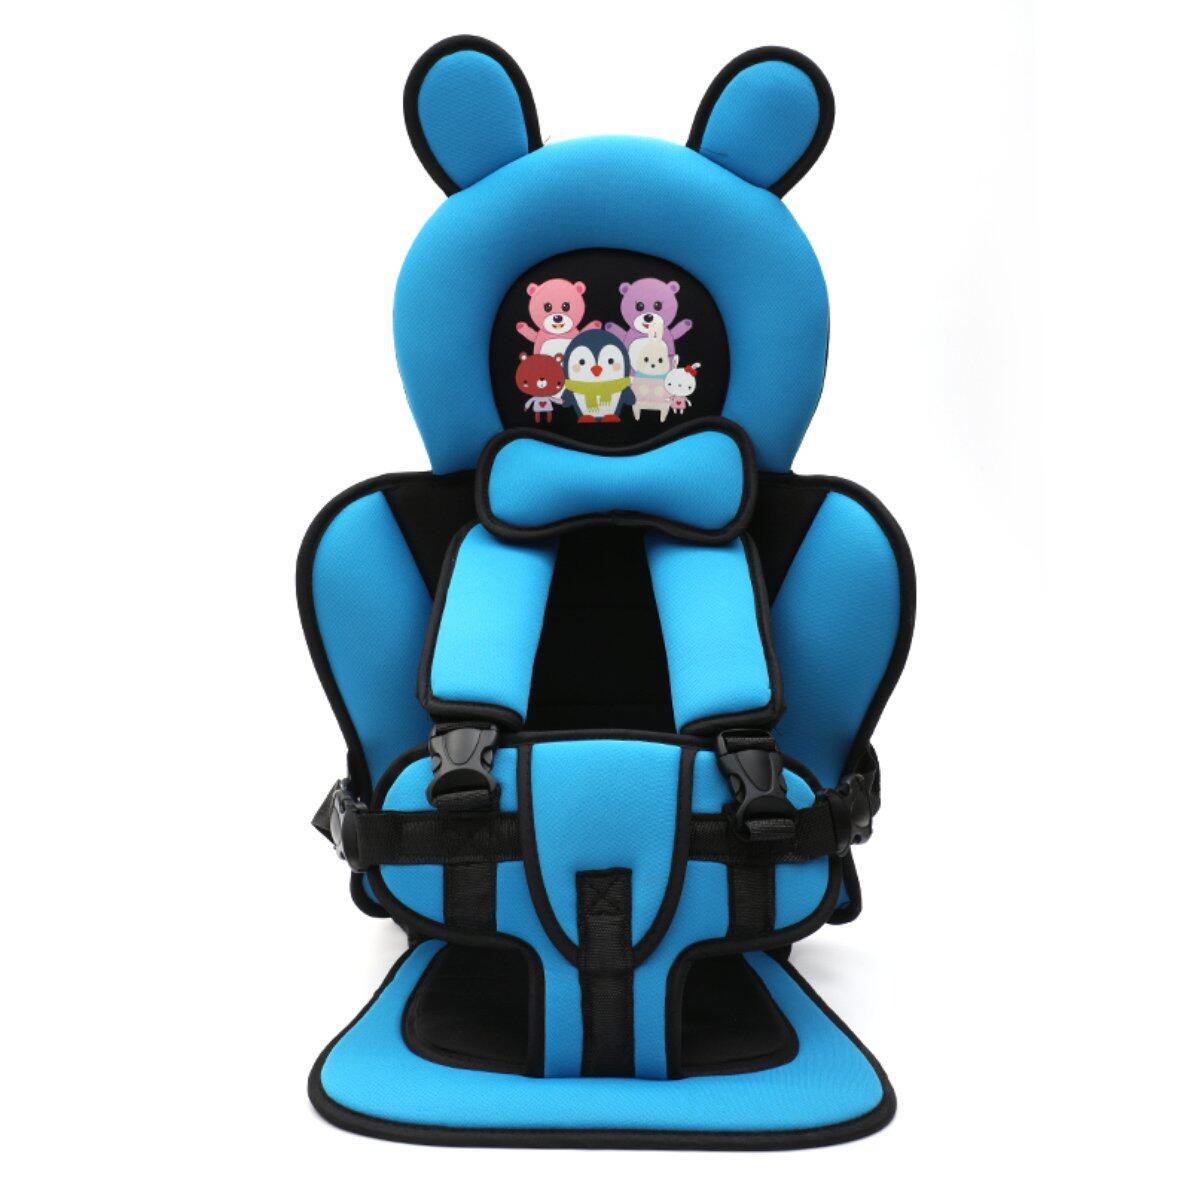 Top Sale Portable Cartoon Baby Safety Seat For Infants From 6 Months To 12 Years